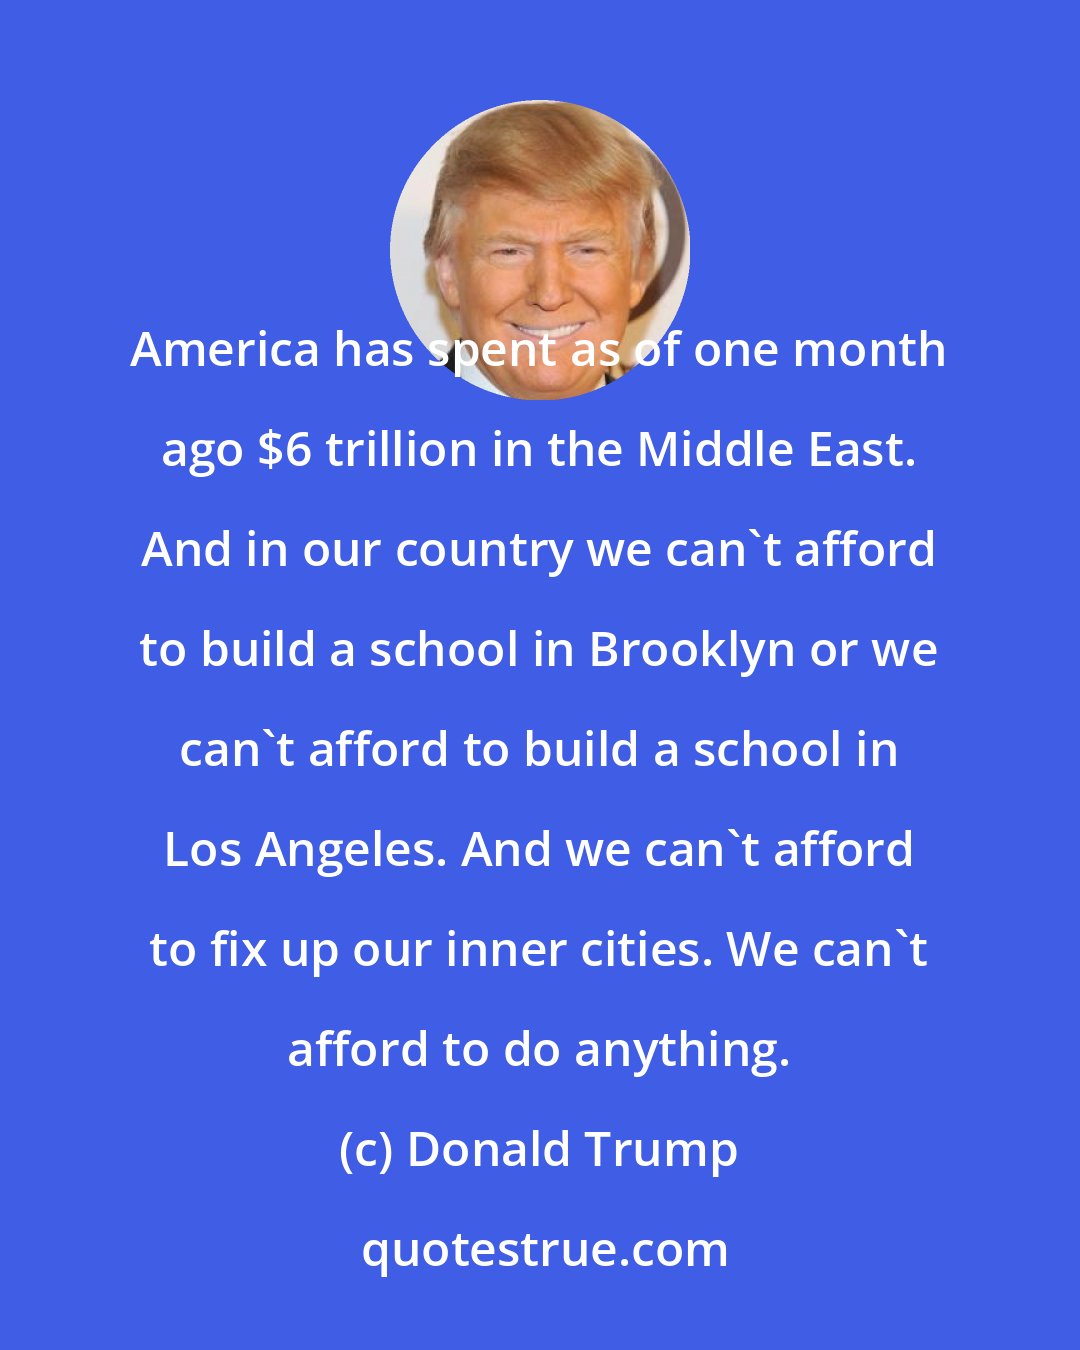 Donald Trump: America has spent as of one month ago $6 trillion in the Middle East. And in our country we can't afford to build a school in Brooklyn or we can't afford to build a school in Los Angeles. And we can't afford to fix up our inner cities. We can't afford to do anything.